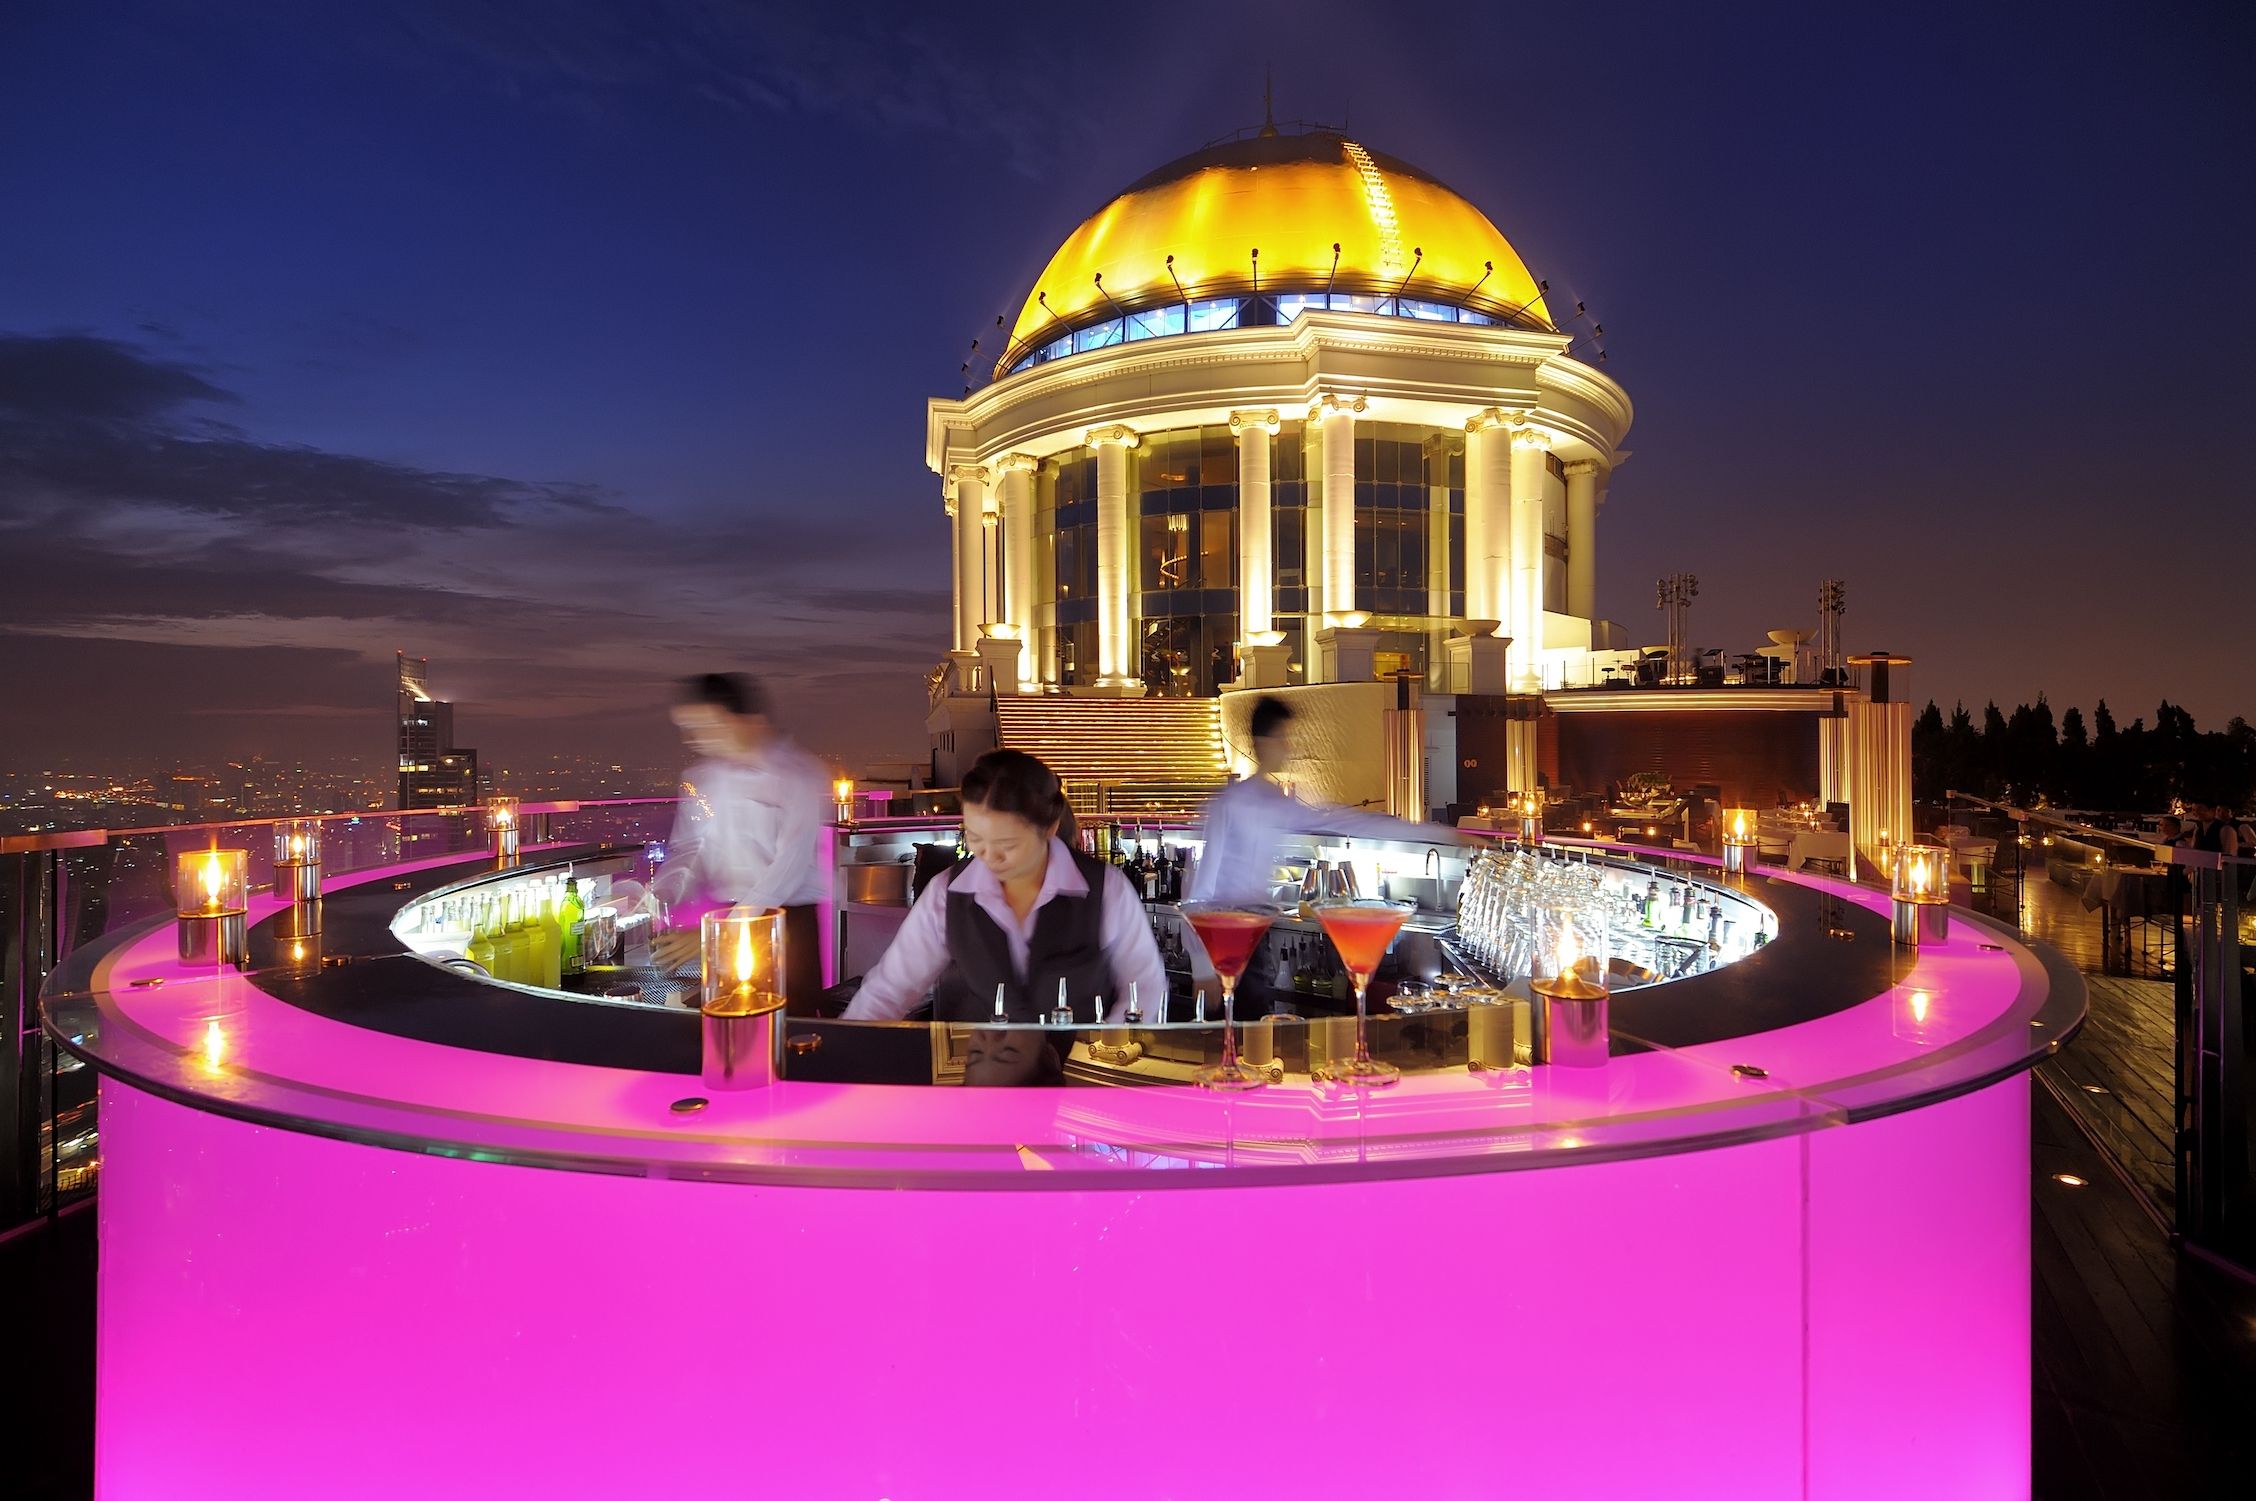 pink light bar by edge of terrace and yellow dome in background